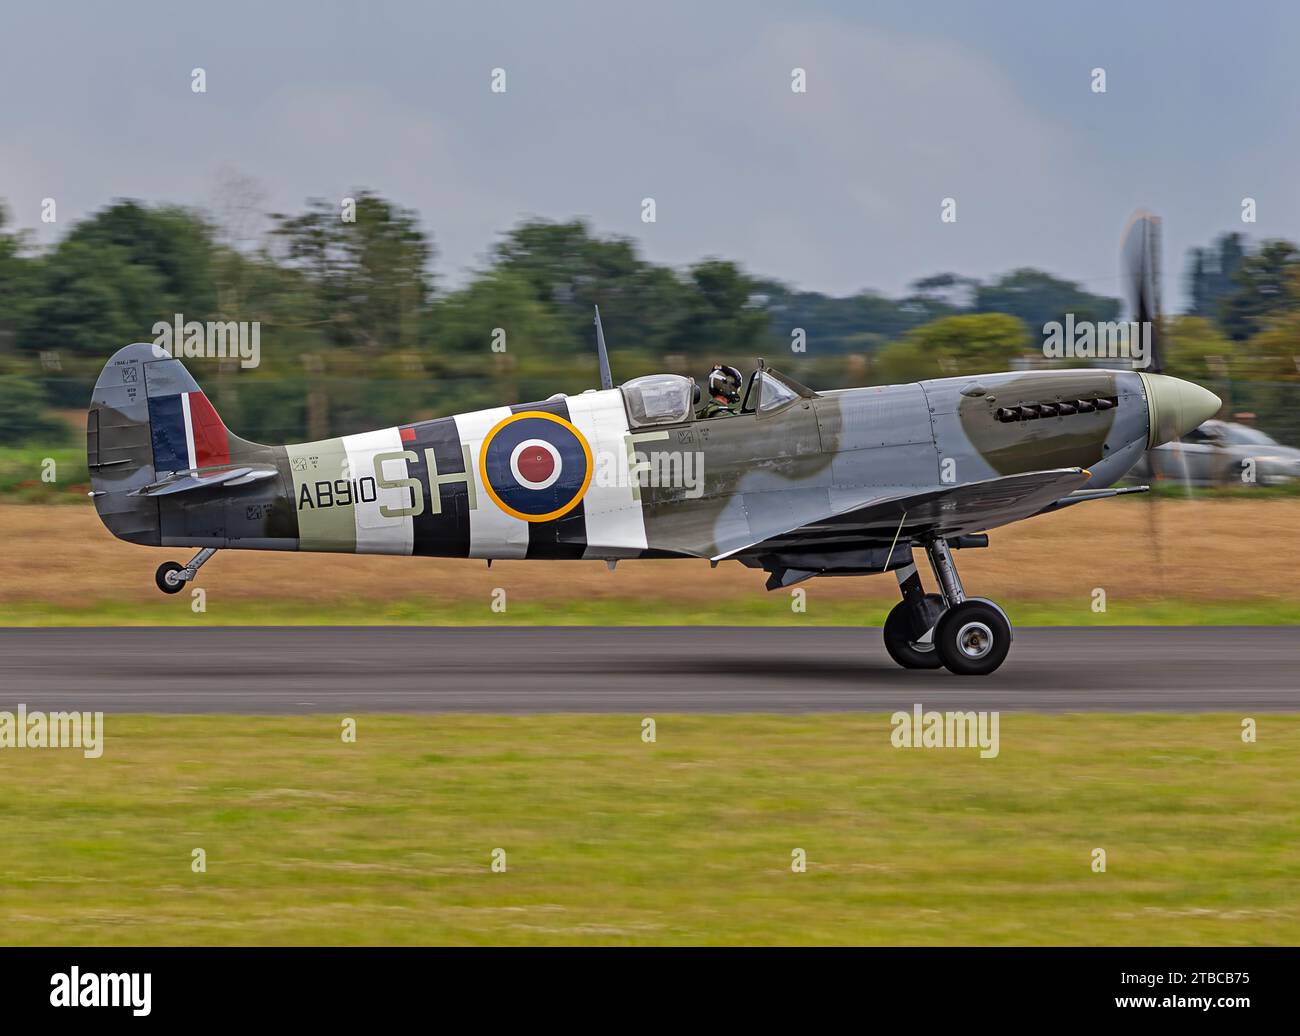 Rolls-Royce Supermarine Spitfire Of The Battle Of Britain Memorial Flight (BBMF) RAF Coningsby, Lincolnshire, England 01.07.2020 Stock Photo